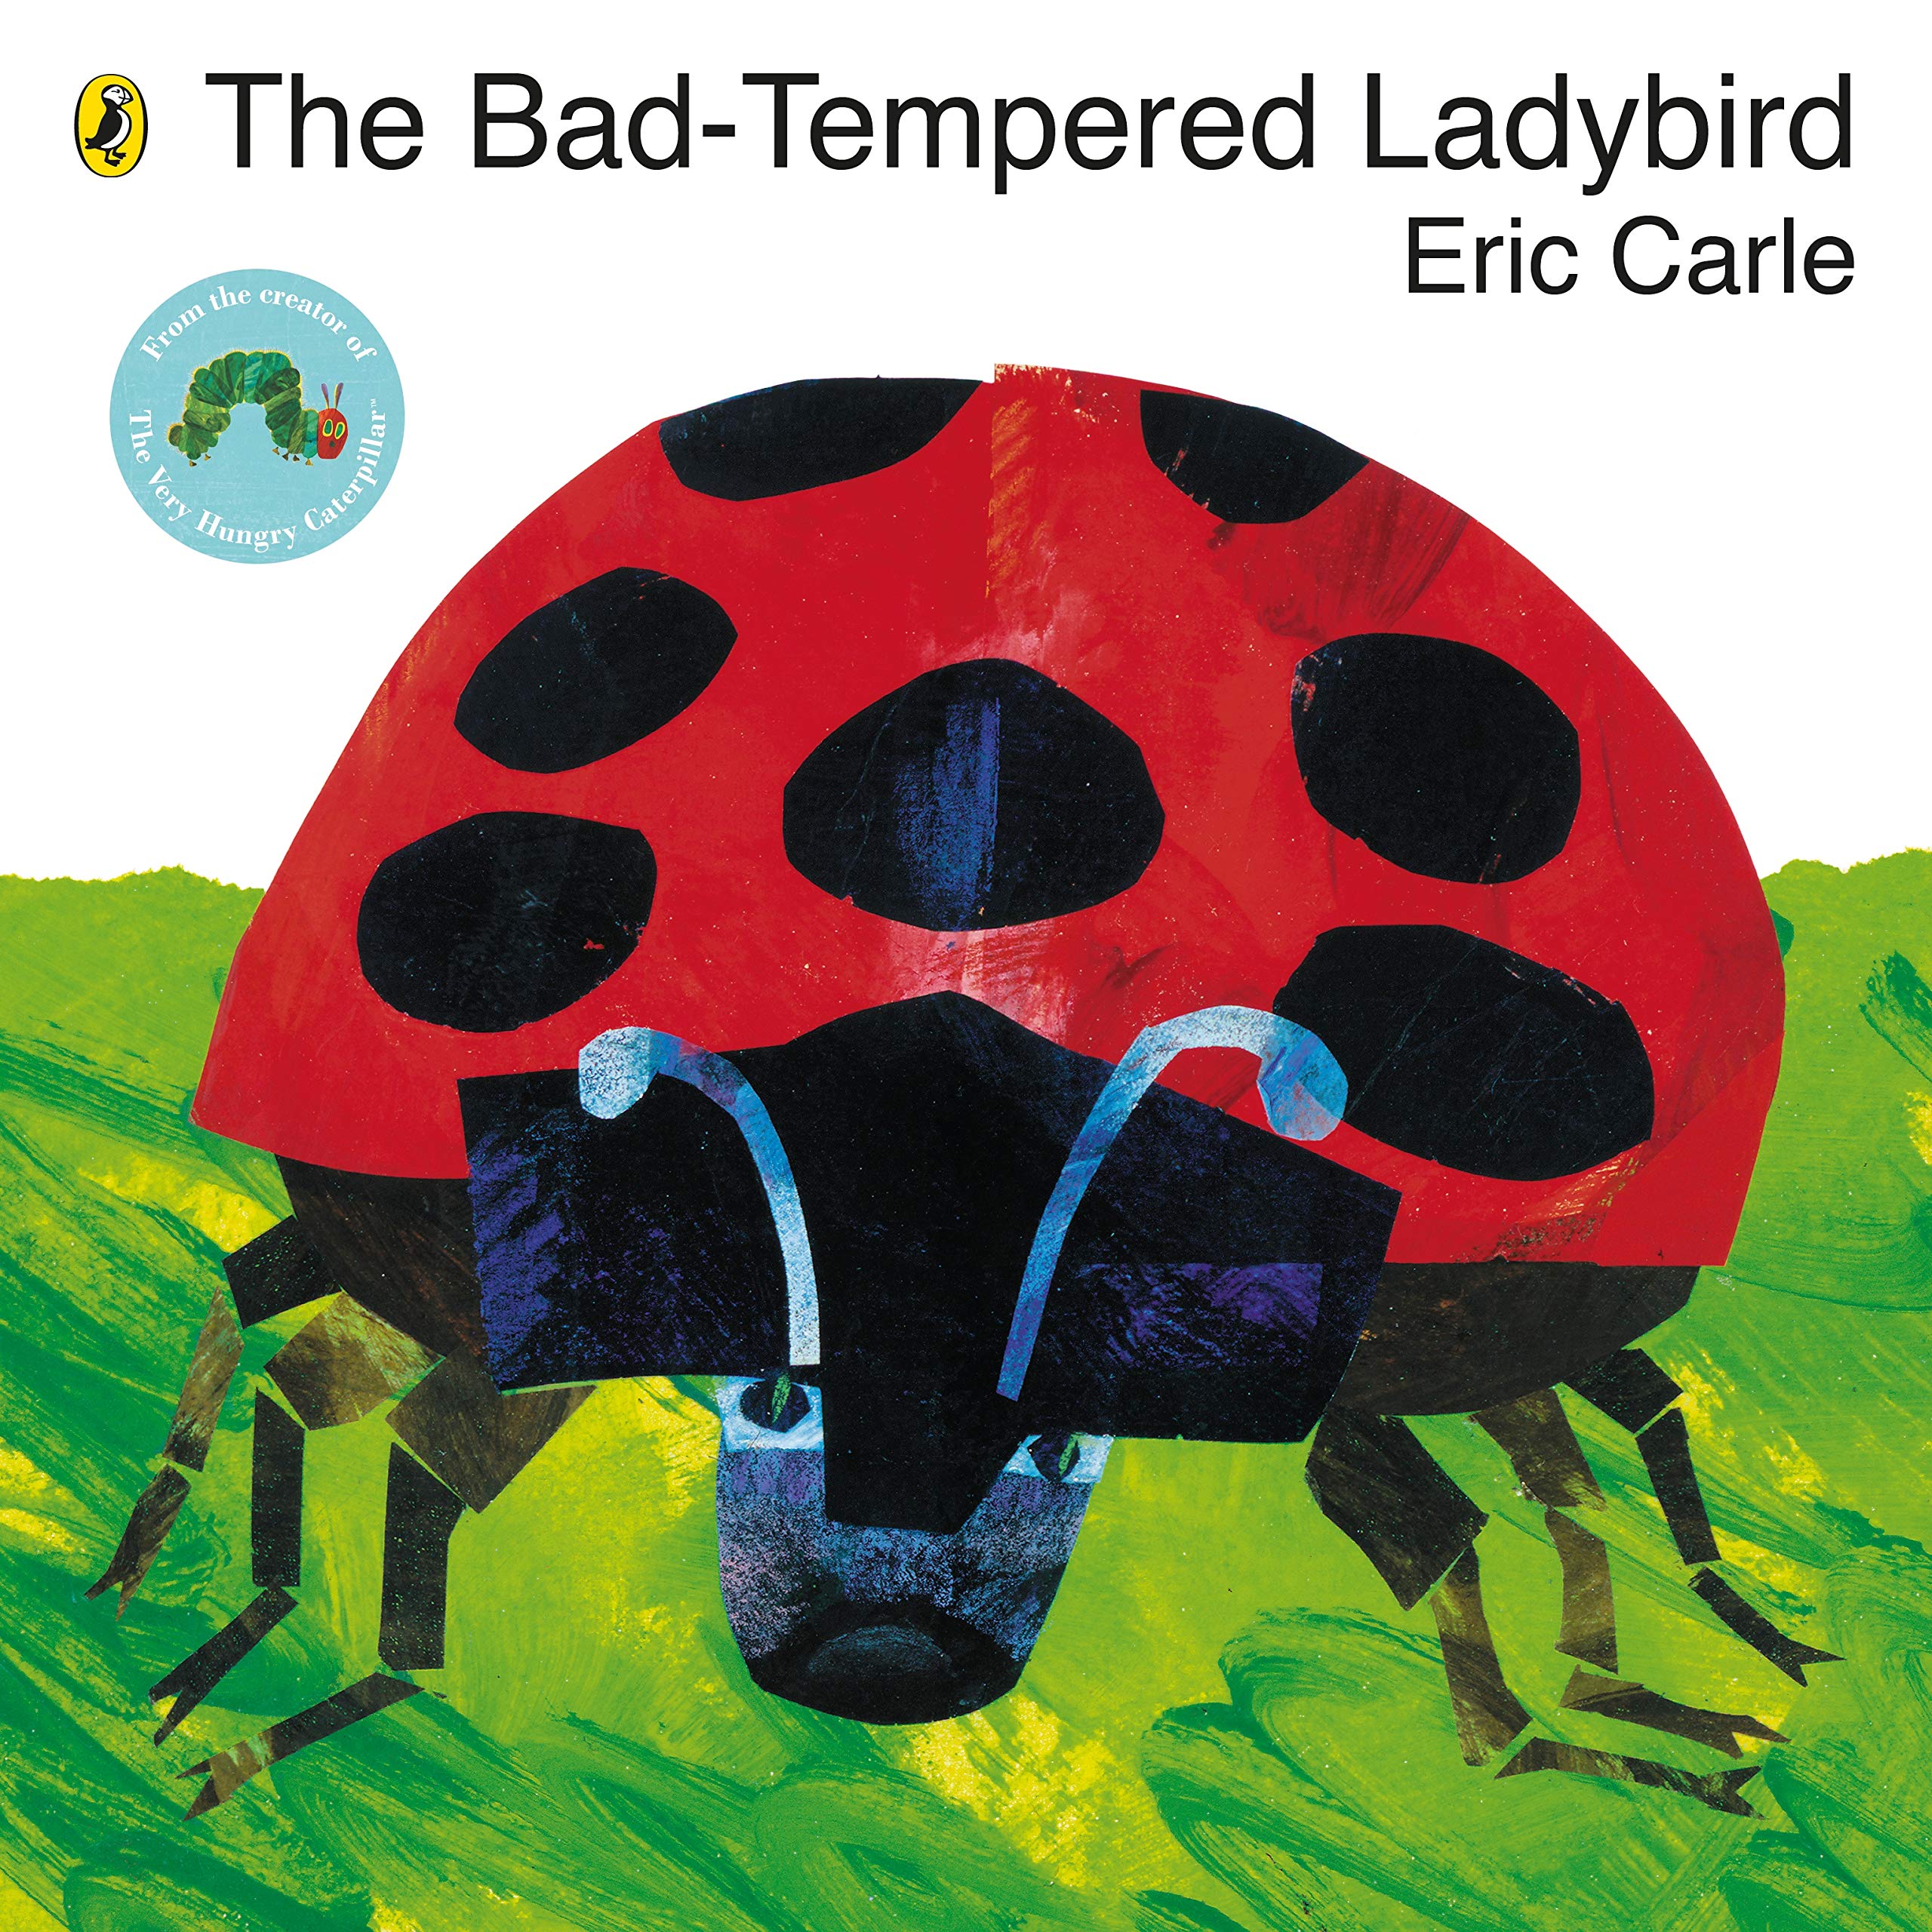 IMG : The Bad Tempered Ladybird